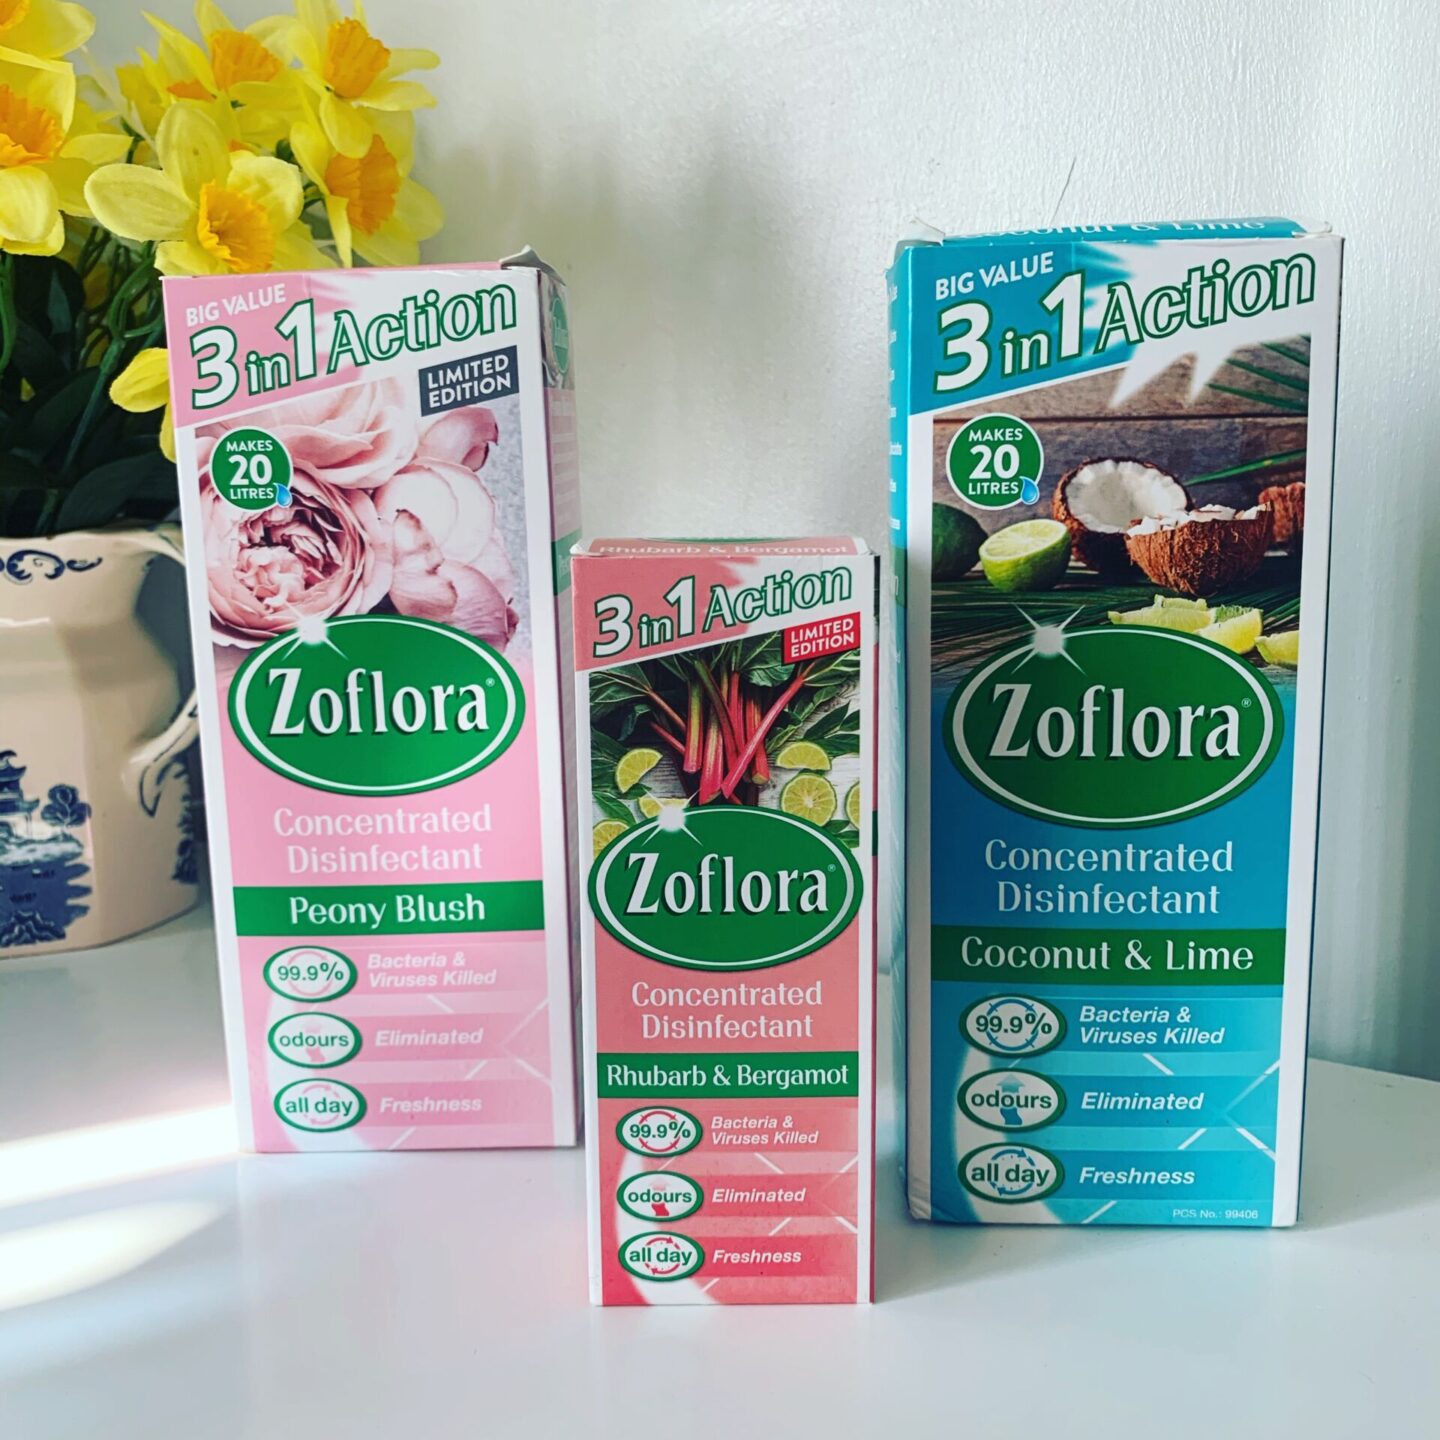 Zoflora: my favourites for making the house smell amazing!